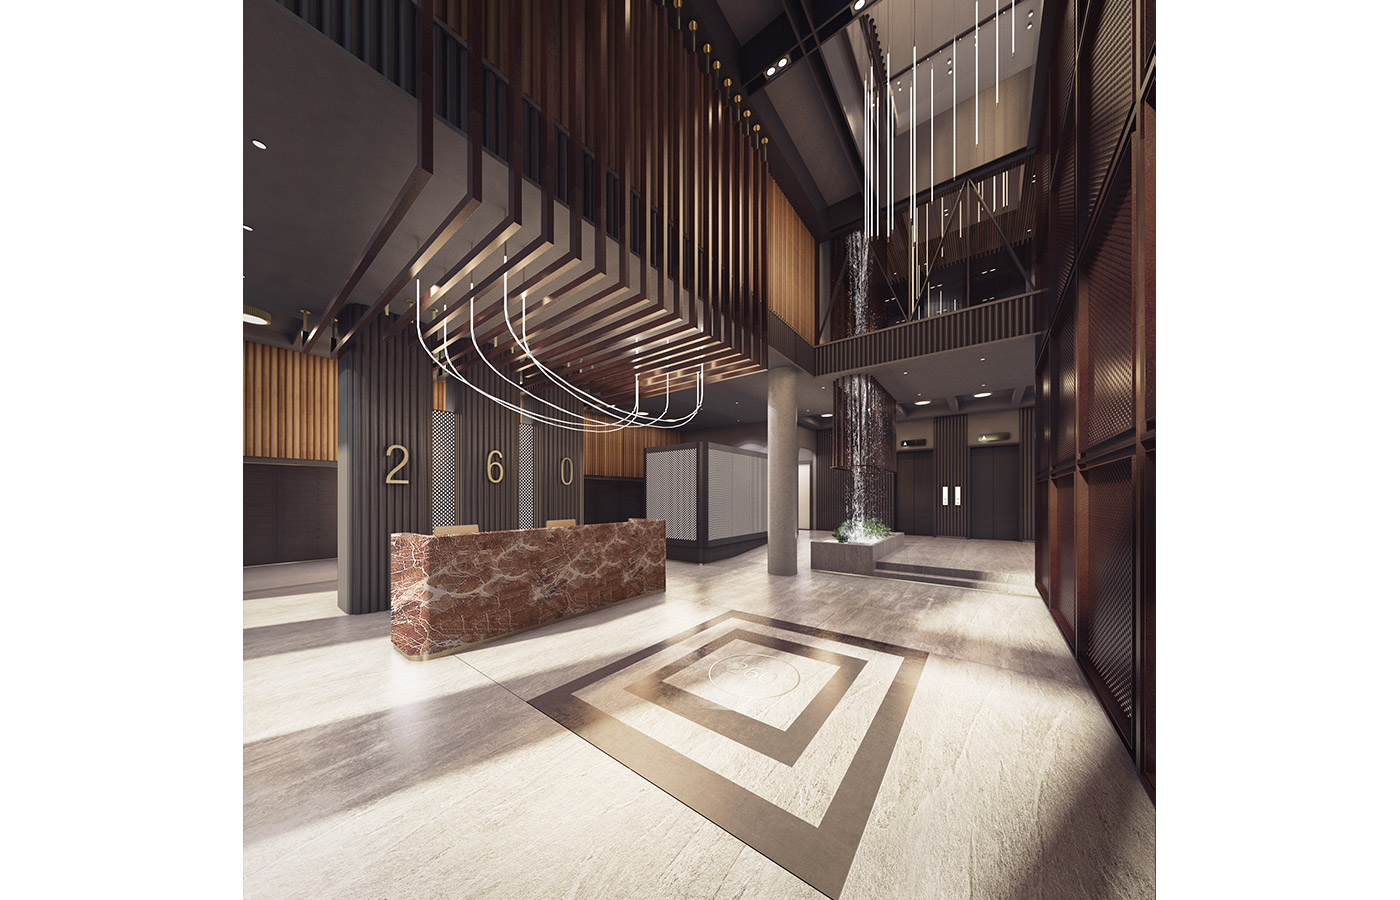 Rendering of the residential lobby at 260 Gold Street - StudiosC Architecture